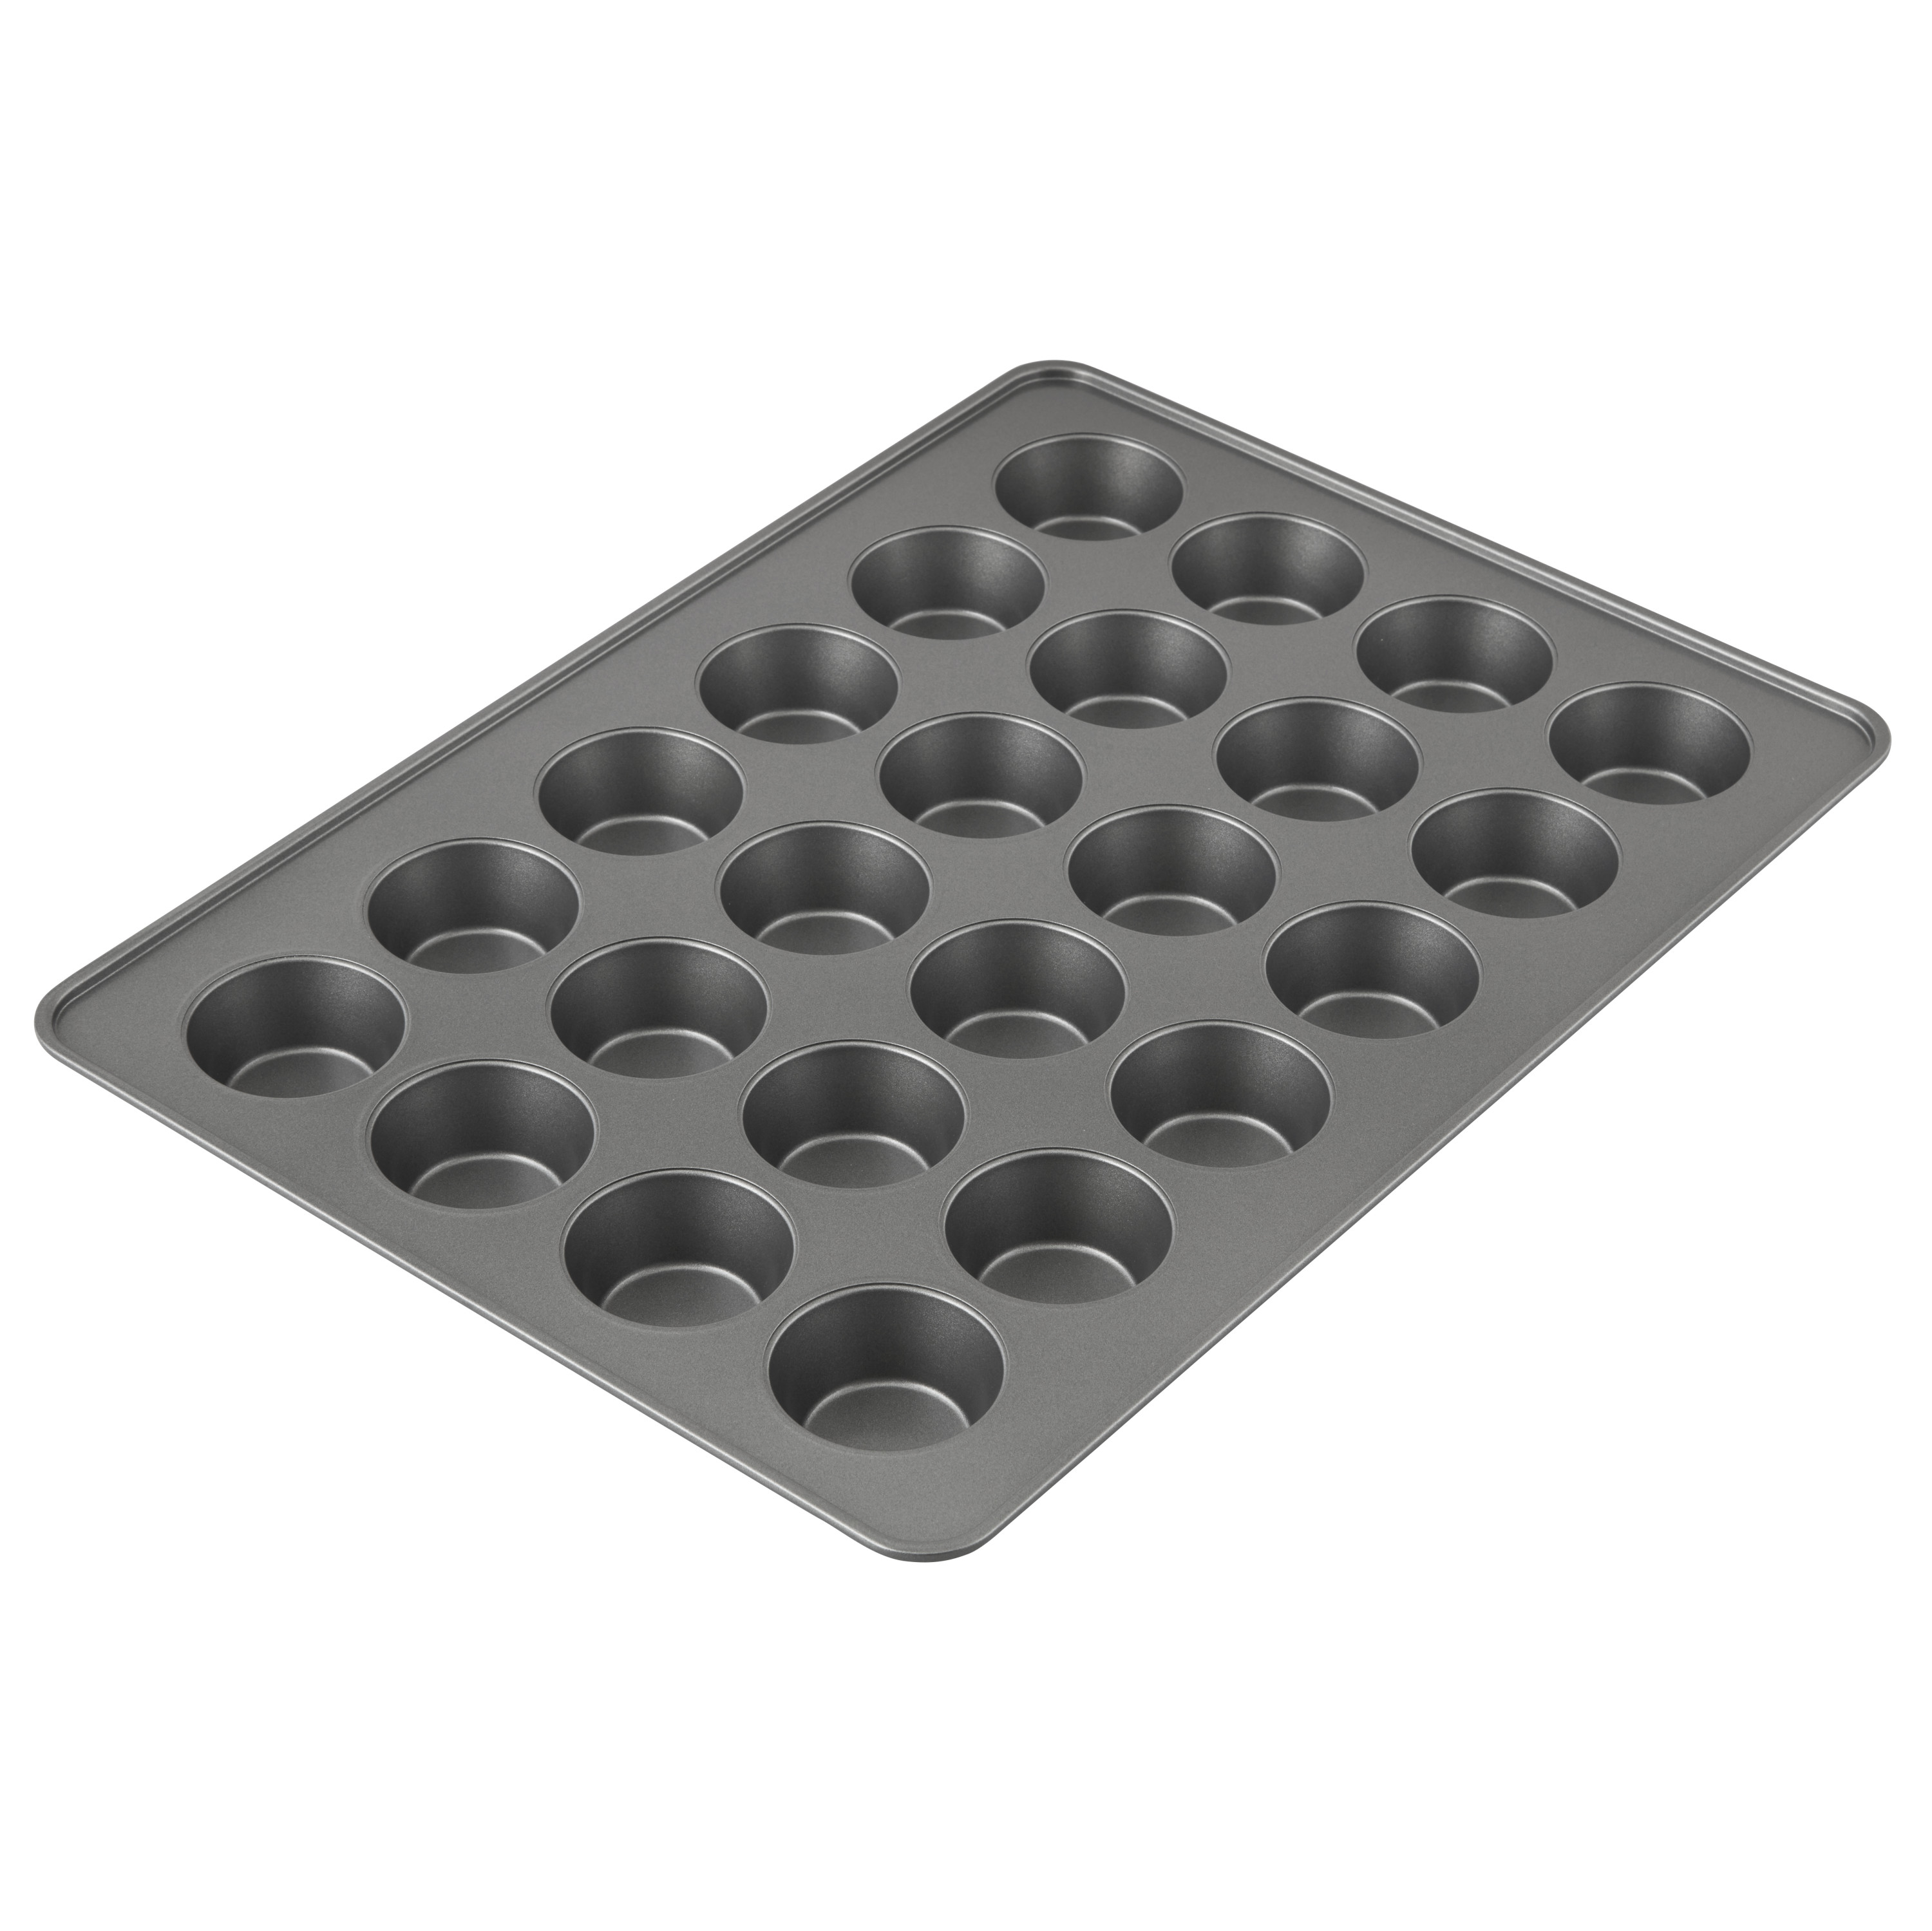 Wilton Bake It Better Non-Stick Muffin and Cupcake Pan, 24-Cup ...